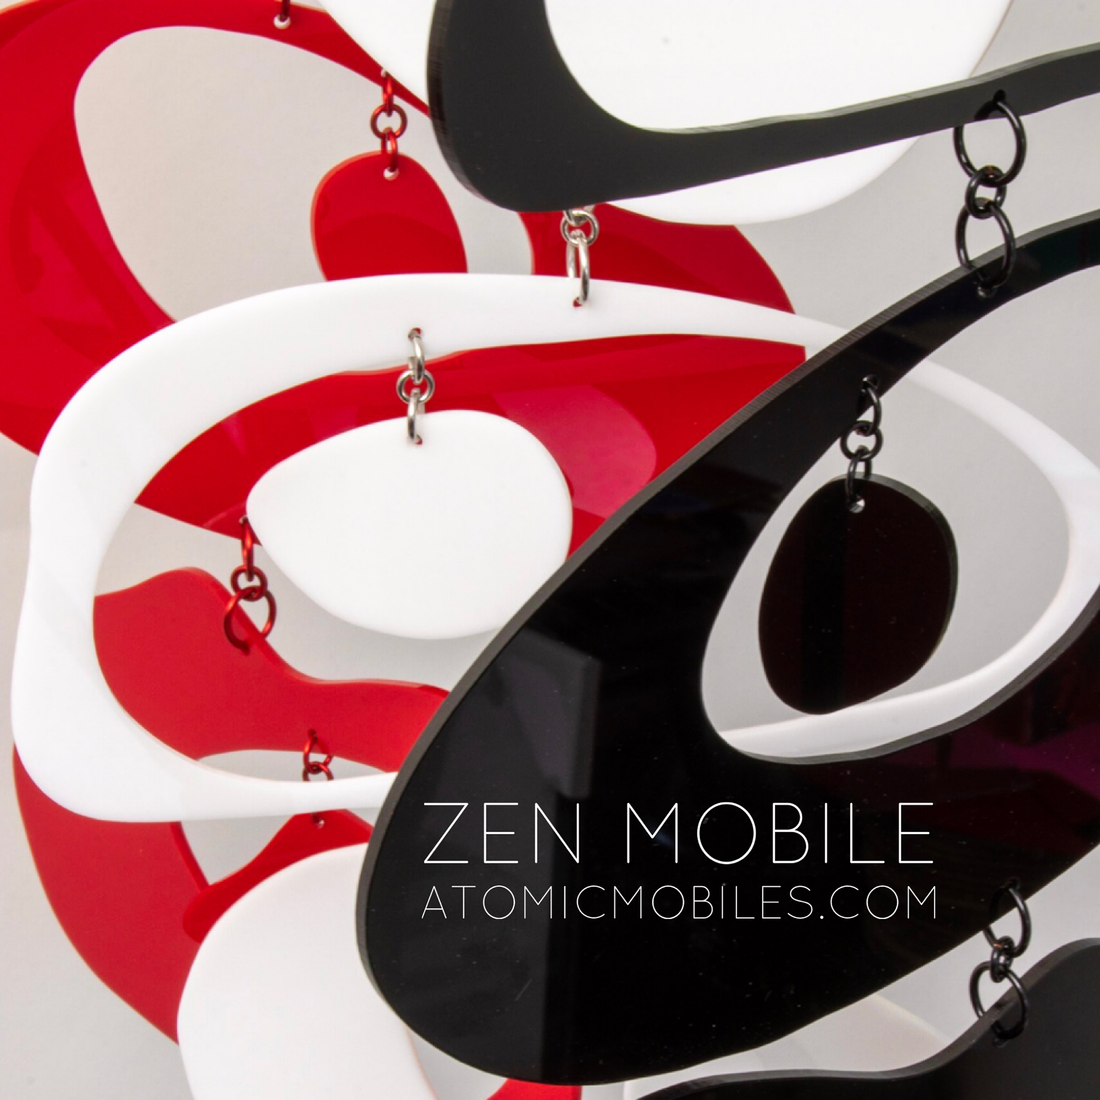 Zen Mobile by AtomicMobiles.com - Inspired by Zen rock balancing. Interpretive, highly personal, calm through awareness. 